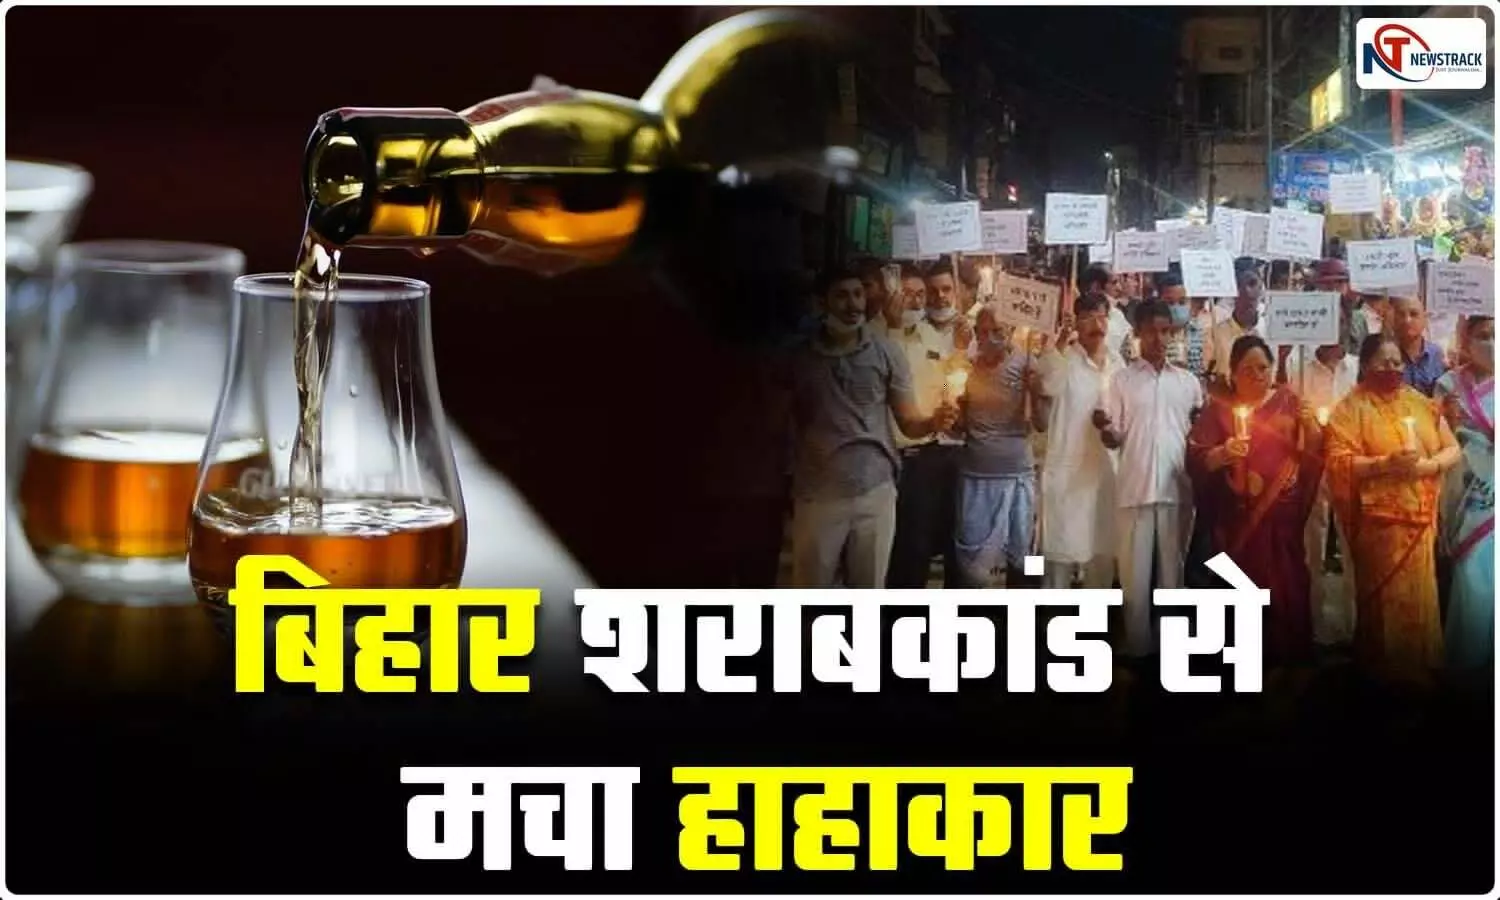 Three people died after drinking poisonous liquor